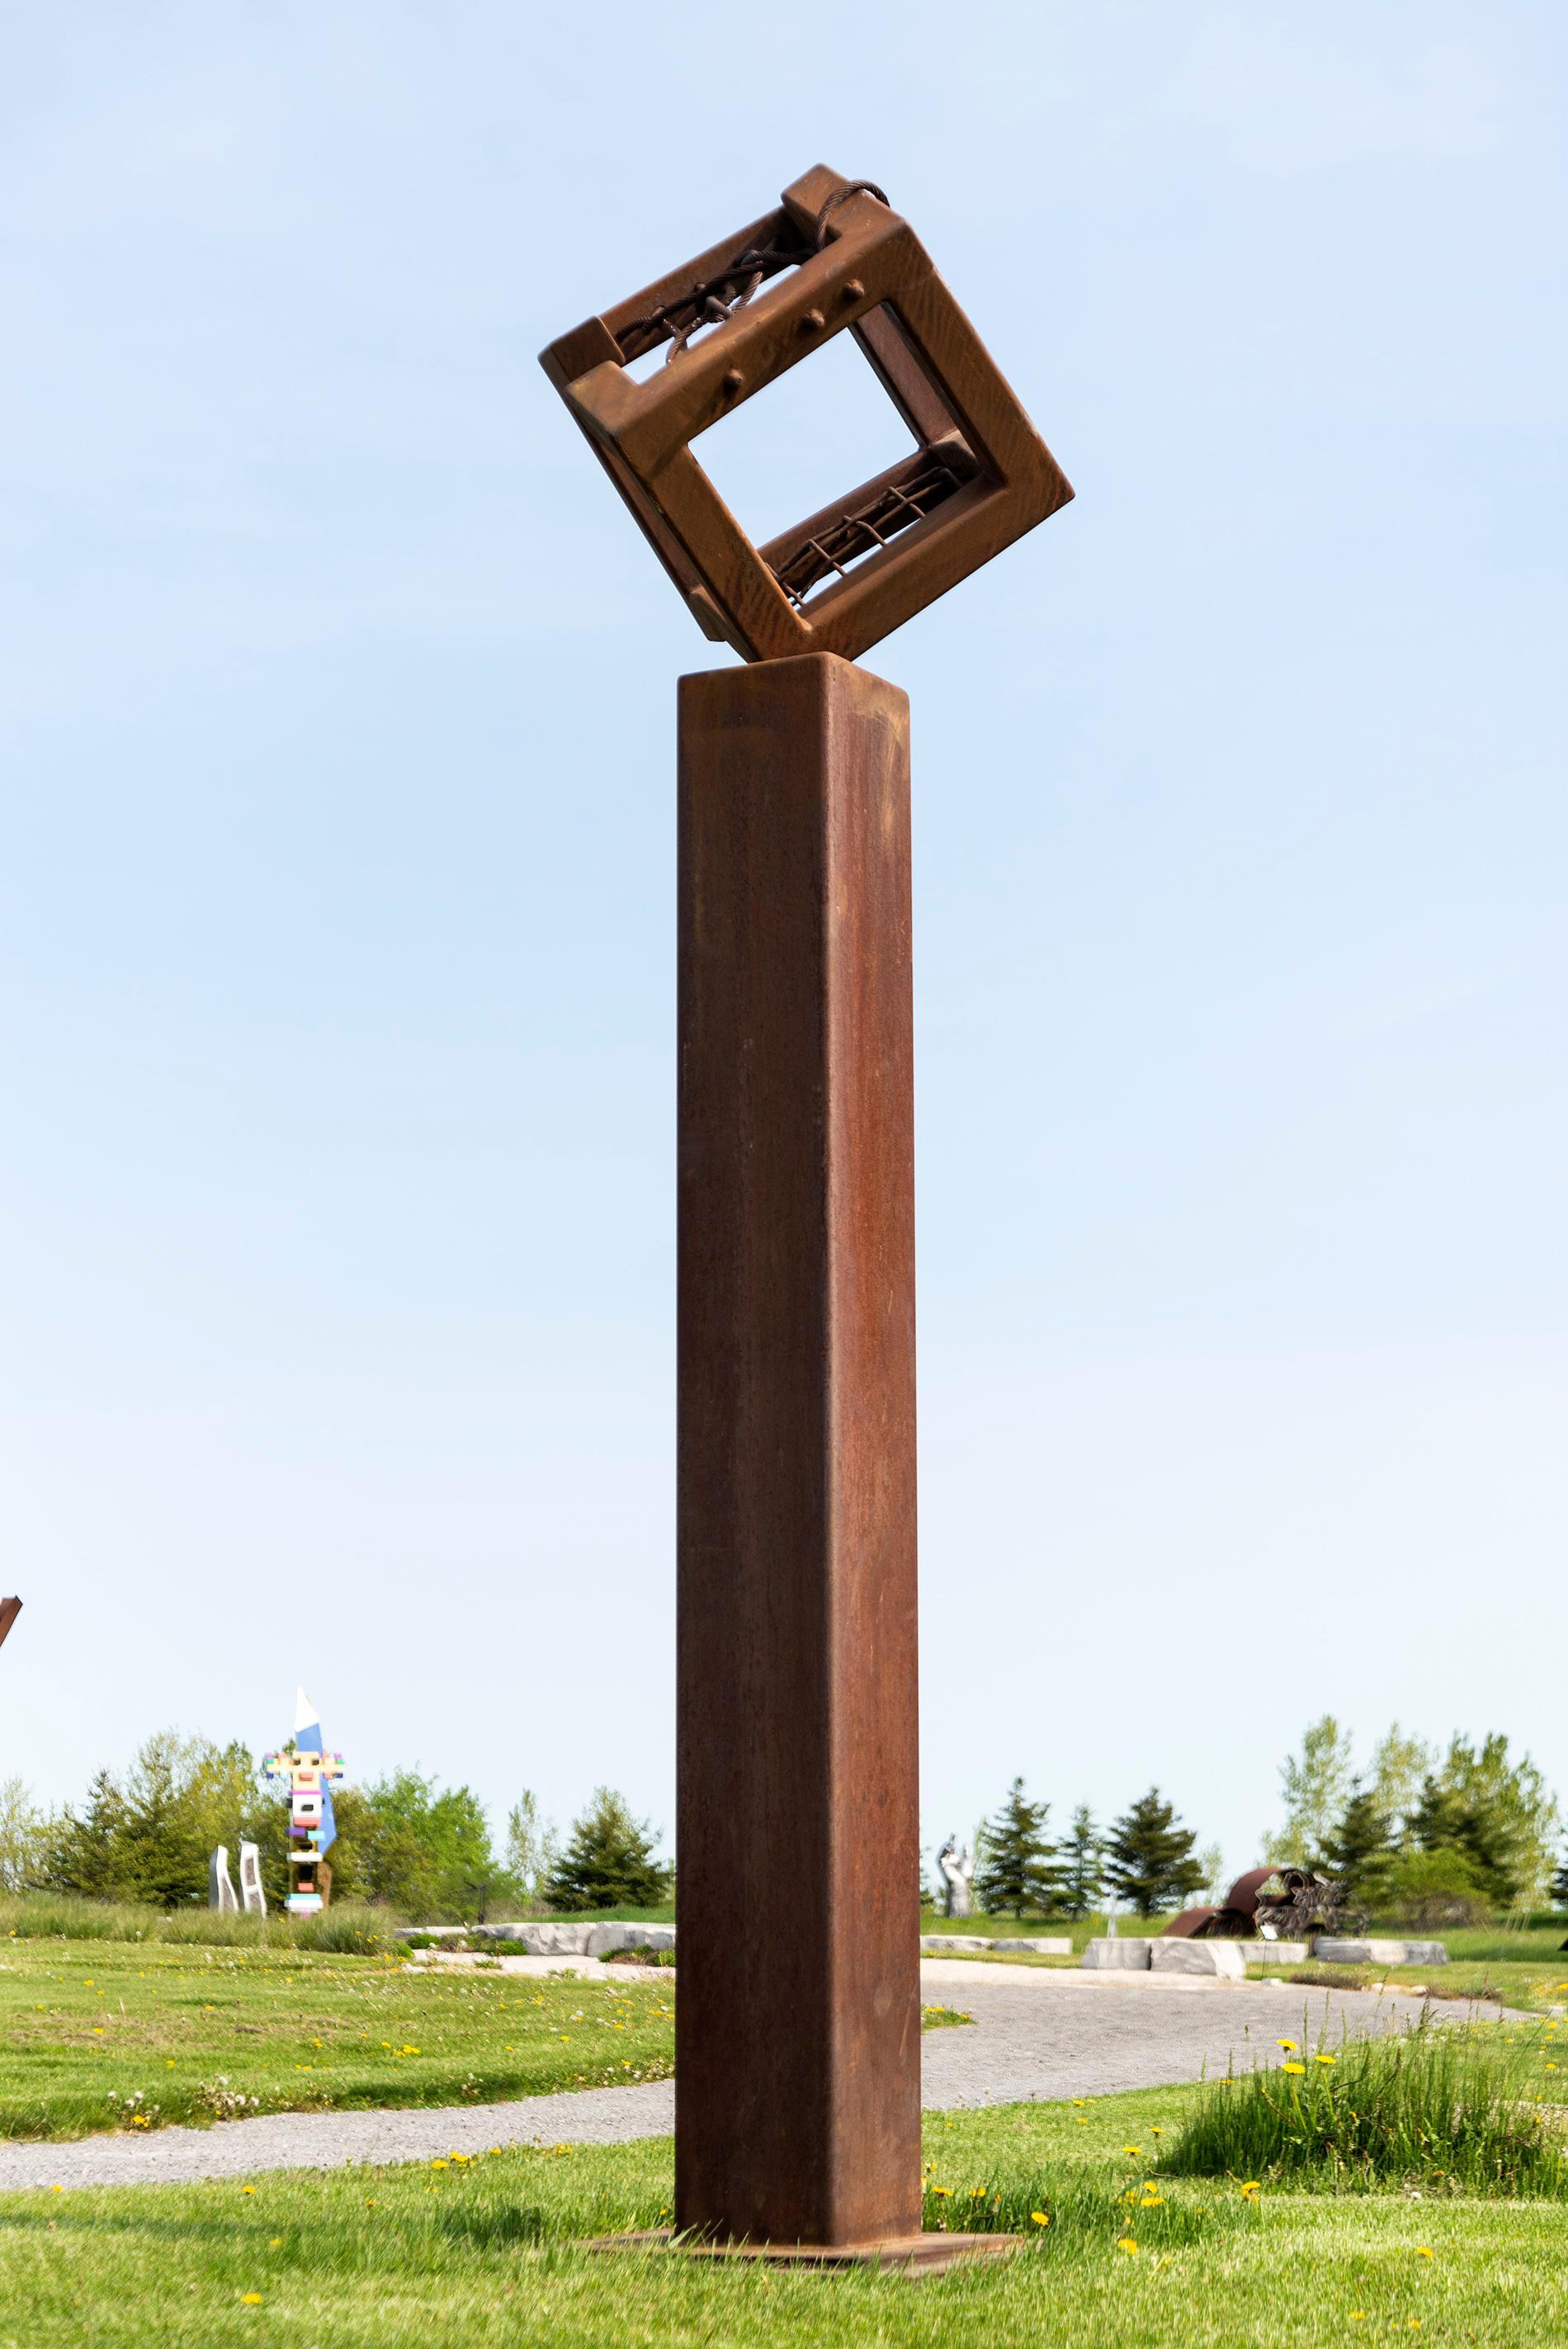 Quebec artist Claude Millette has been creating uniquely compelling sculptures for more than four decades. This outdoor piece in corten steel features a cube-like open frame (‘broken’ on one side, netted on another) that balances on one corner on